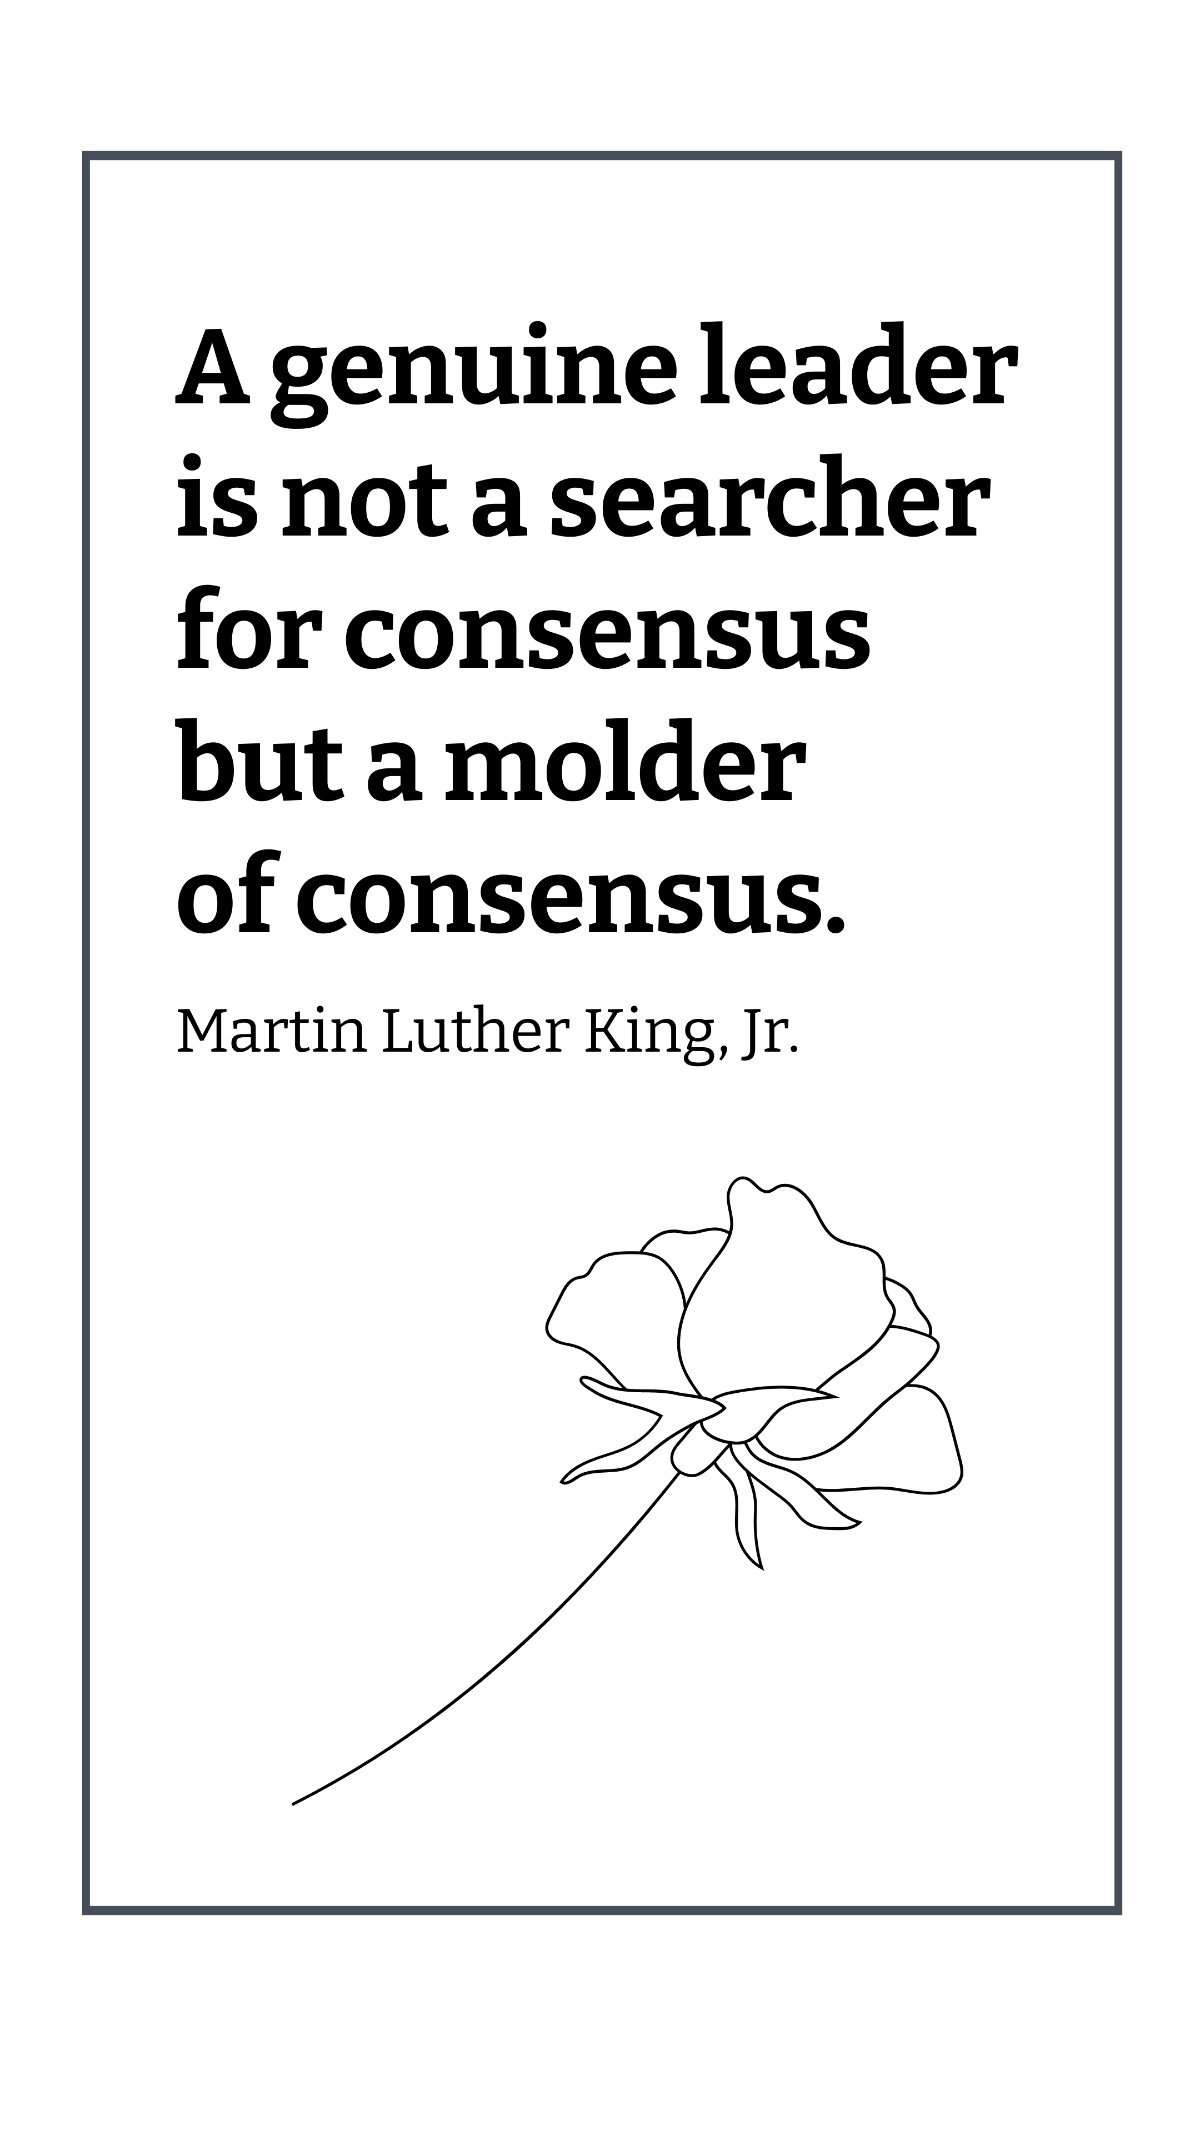 Martin Luther King, Jr. - A genuine leader is not a searcher for consensus but a molder of consensus. Template